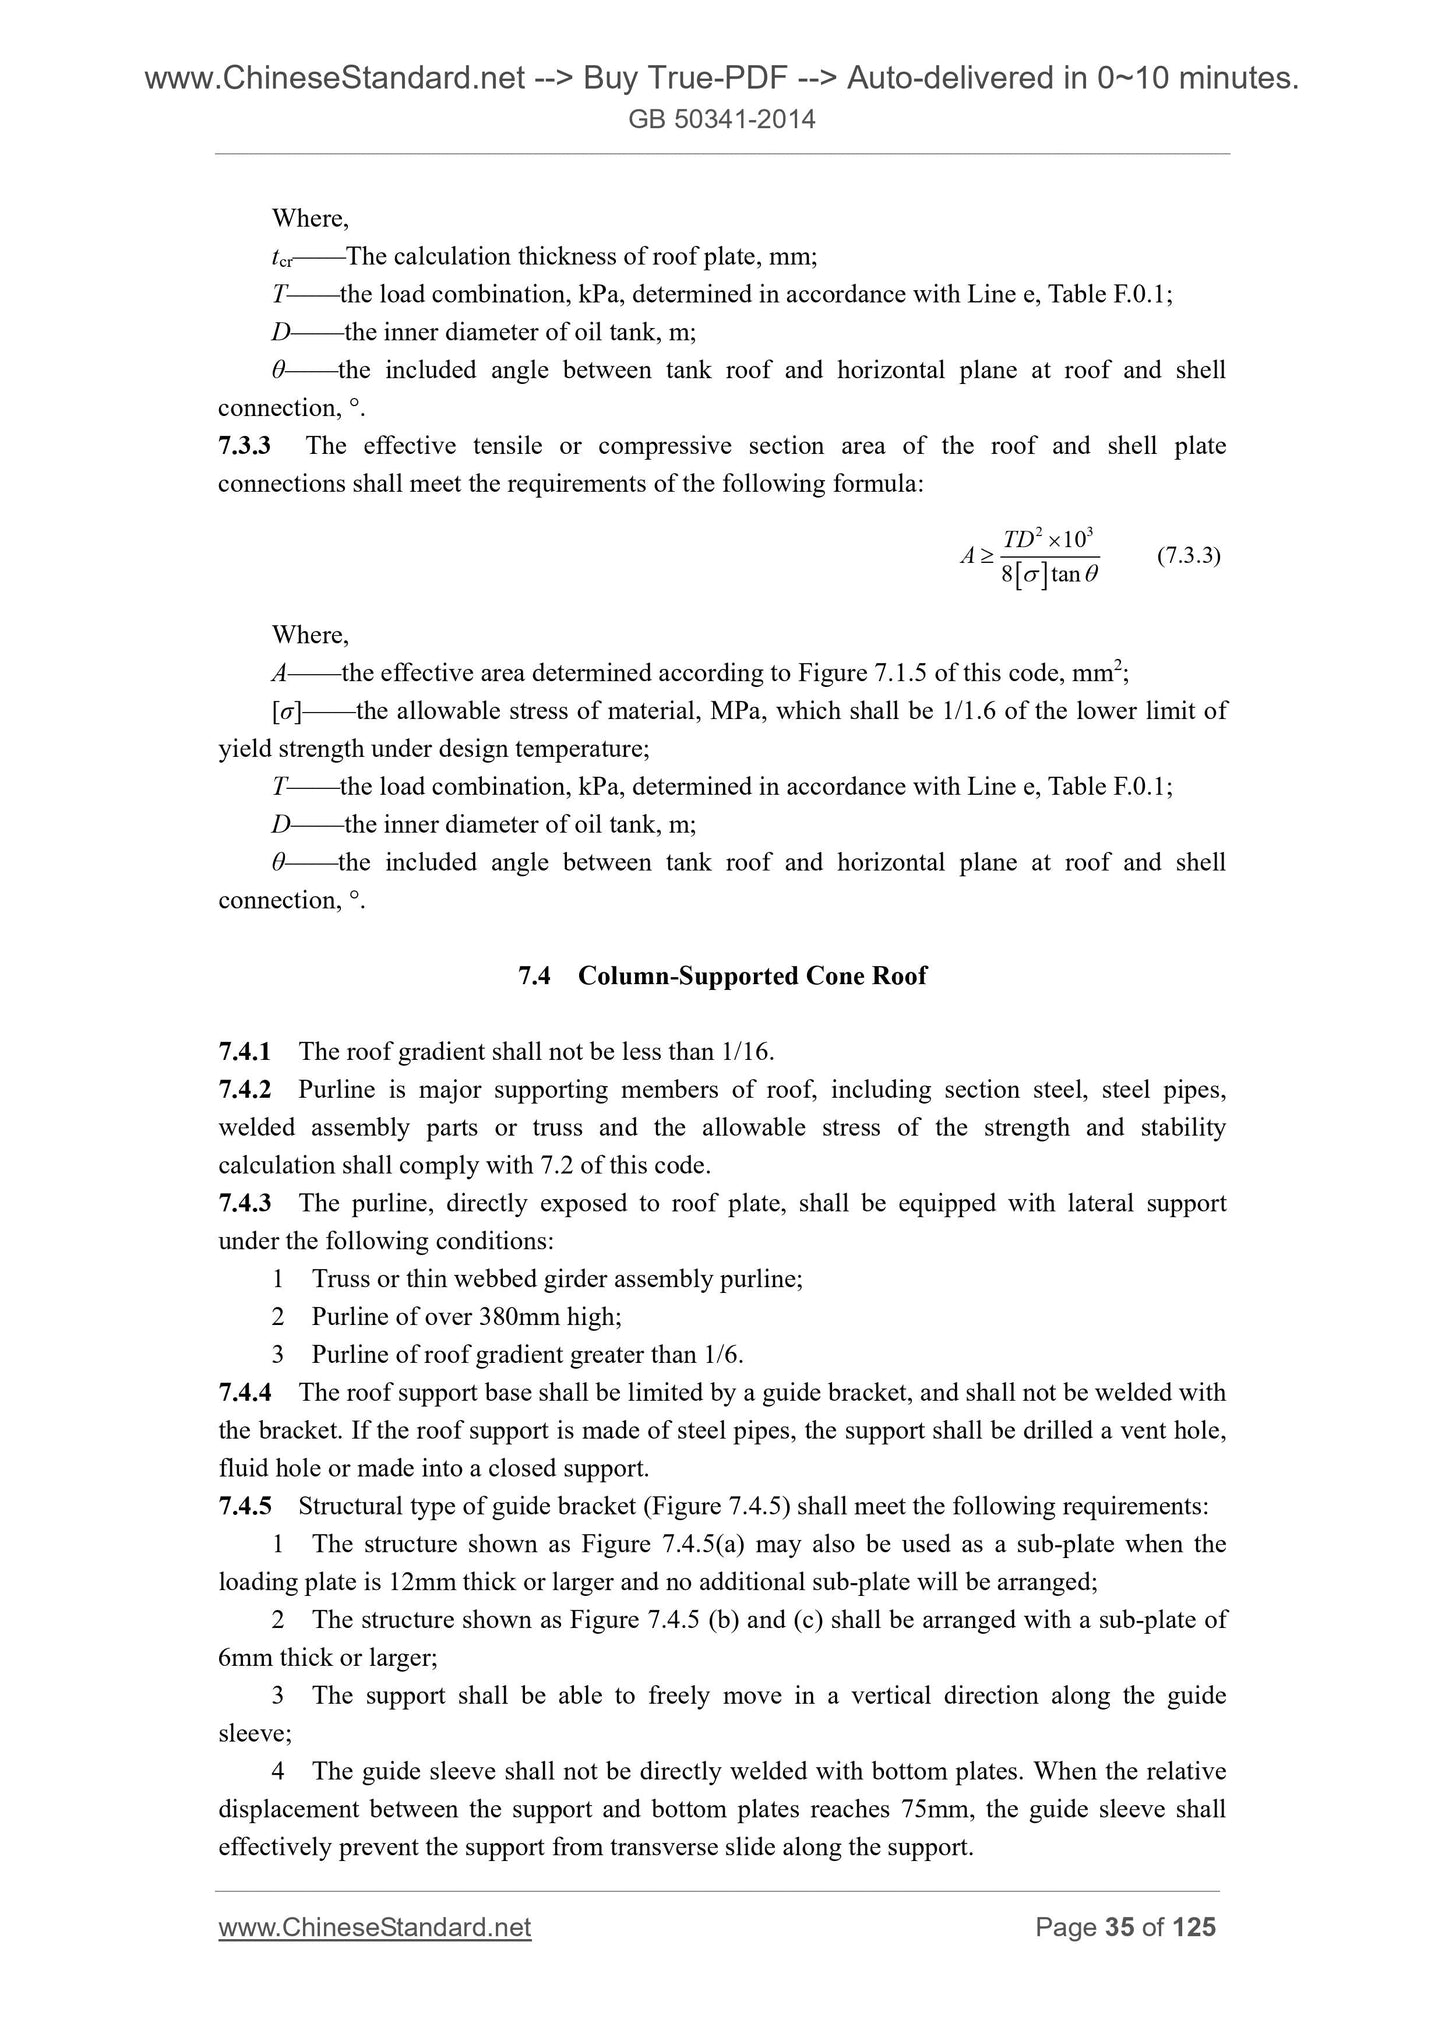 GB 50341-2014 Page 11